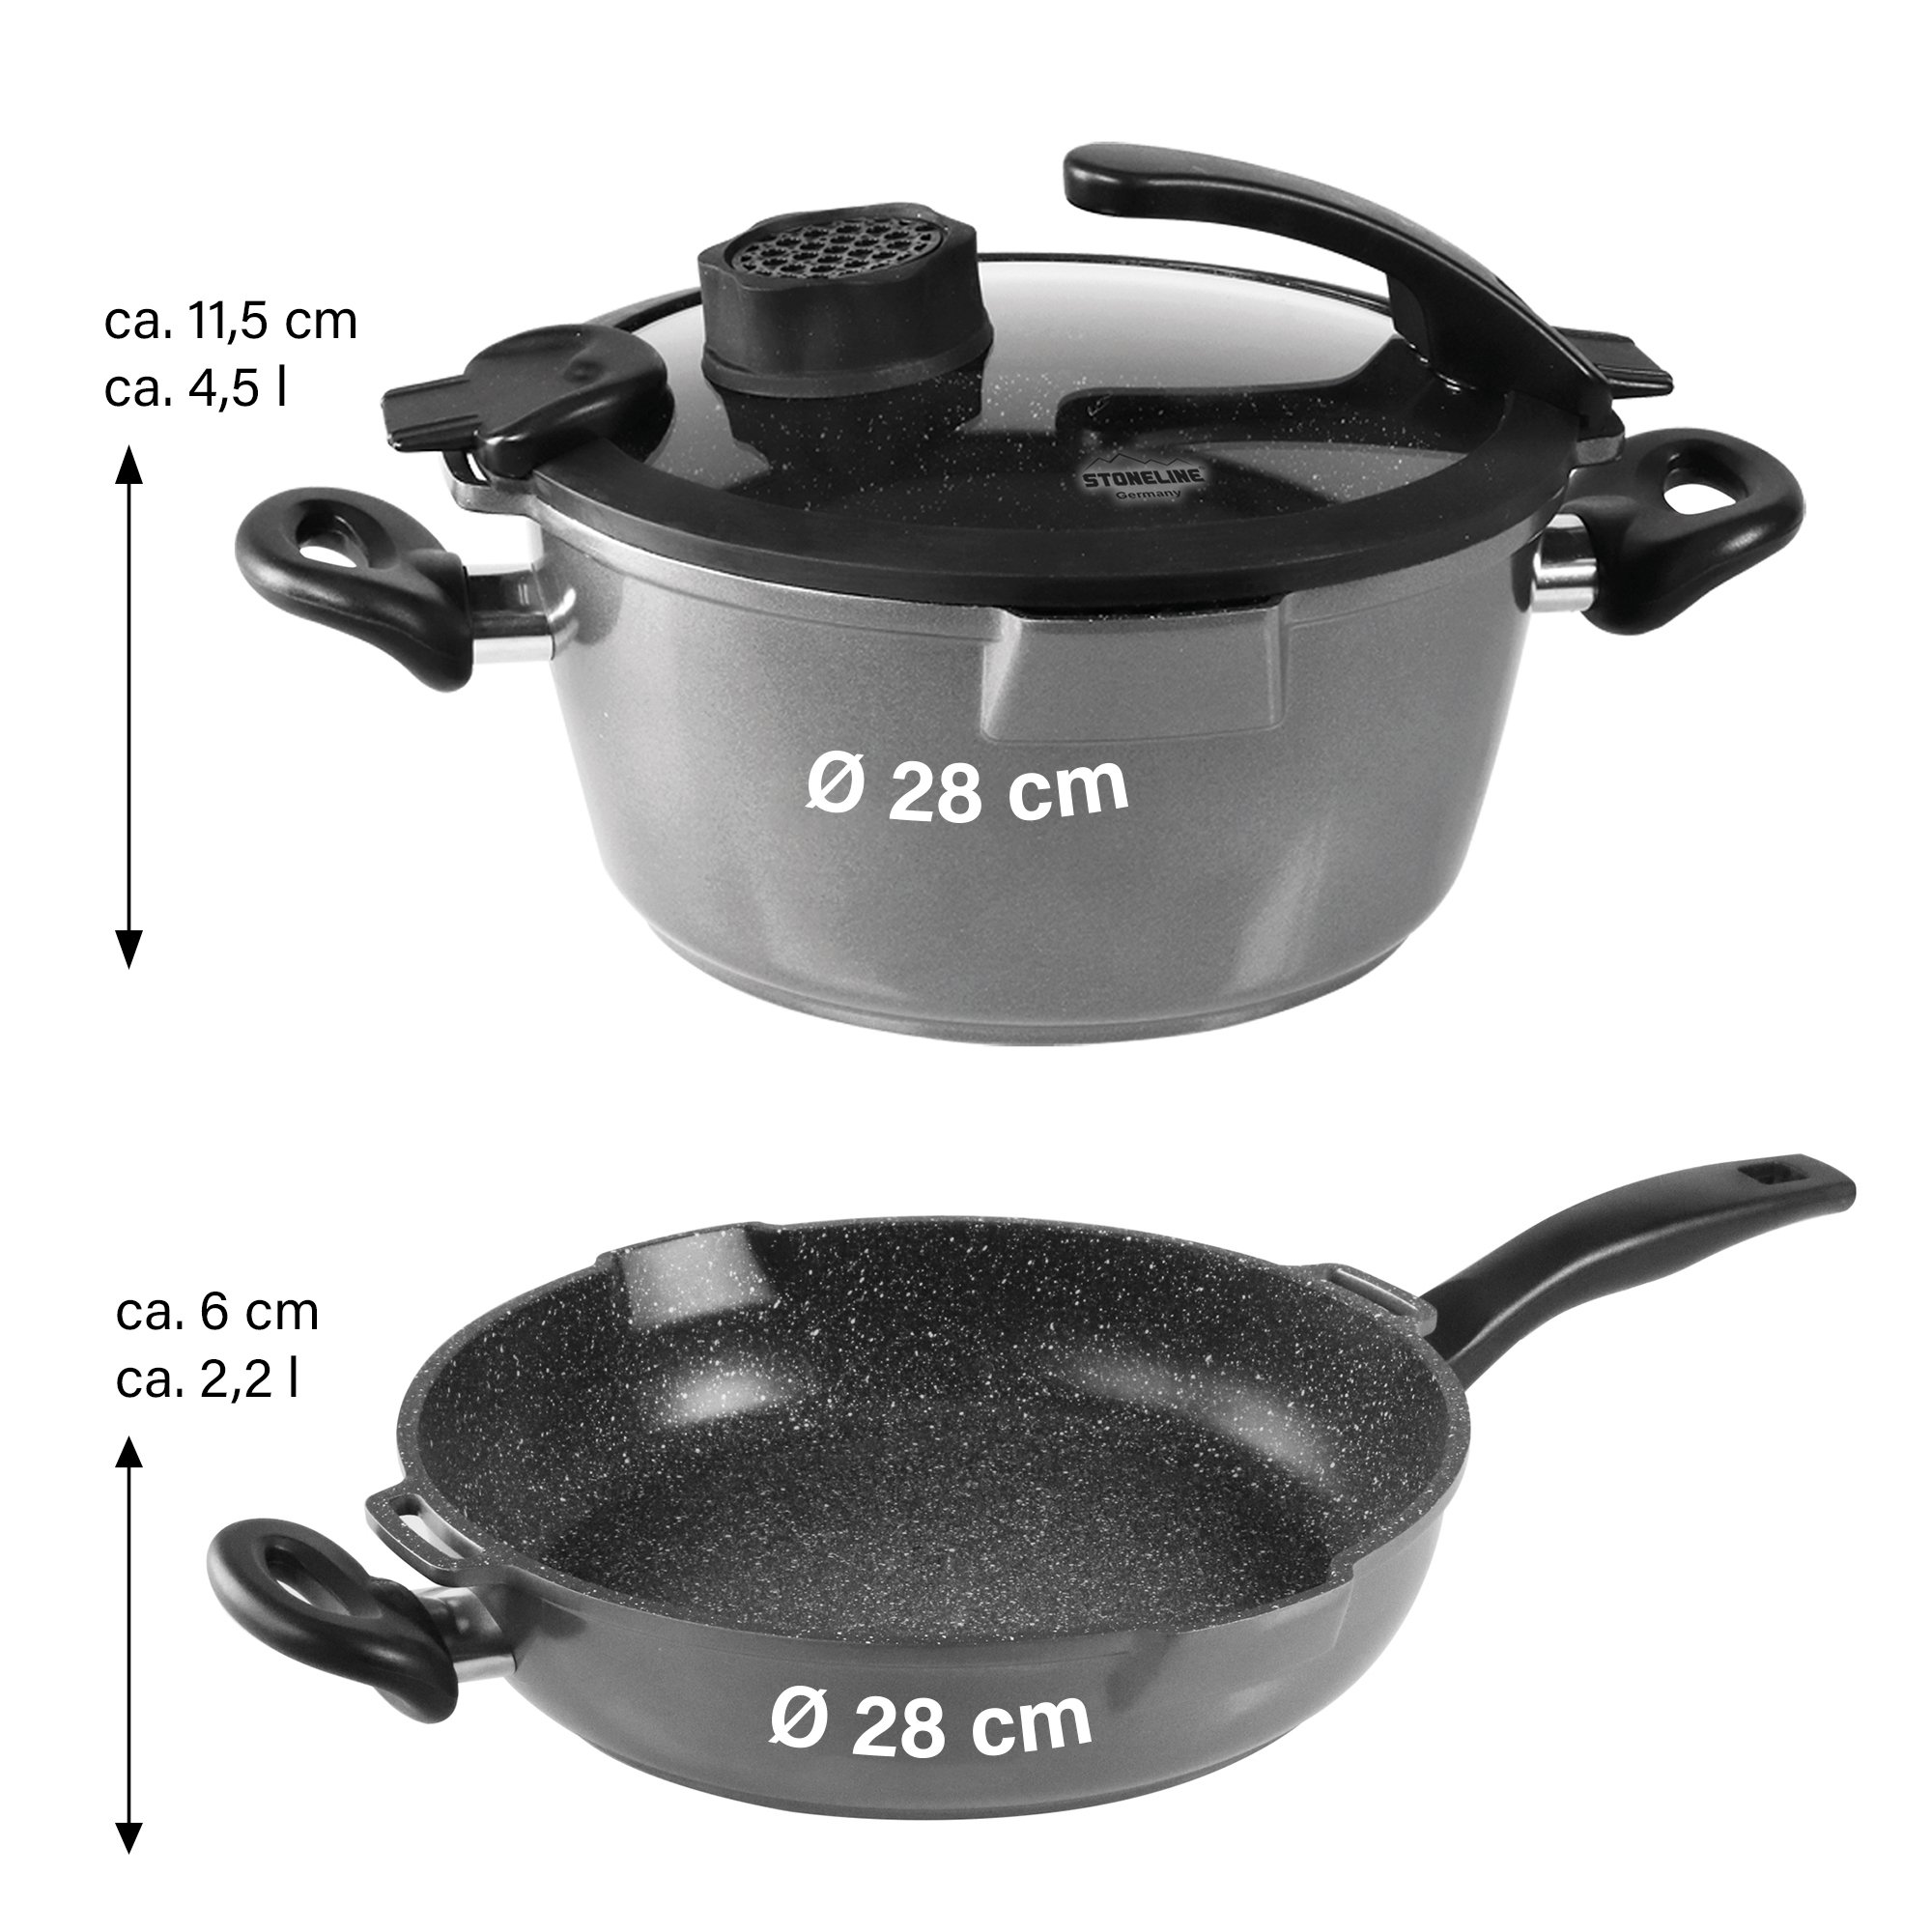 STONELINE® 3 pc Cookware Set 28 cm, Strainer Lid, Odour & Aroma Function | SMELL WELL